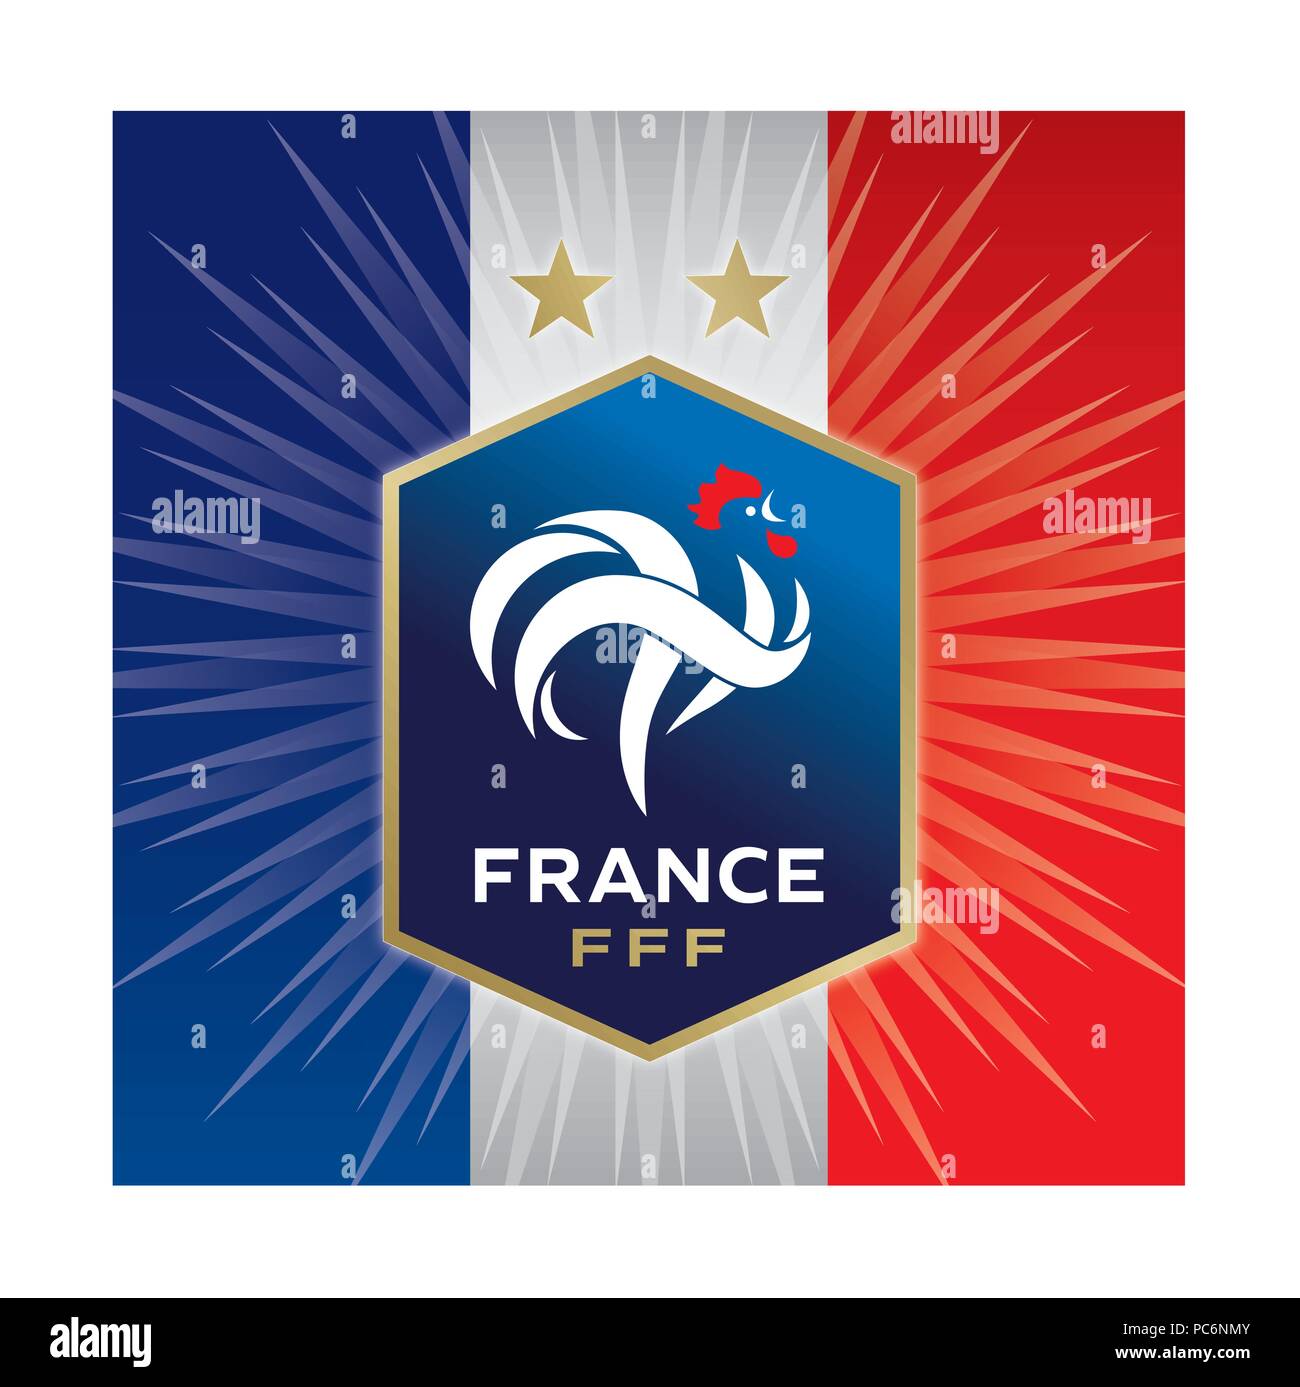 Badge Pin: French football clubs France pins Part 2 - The ICT University